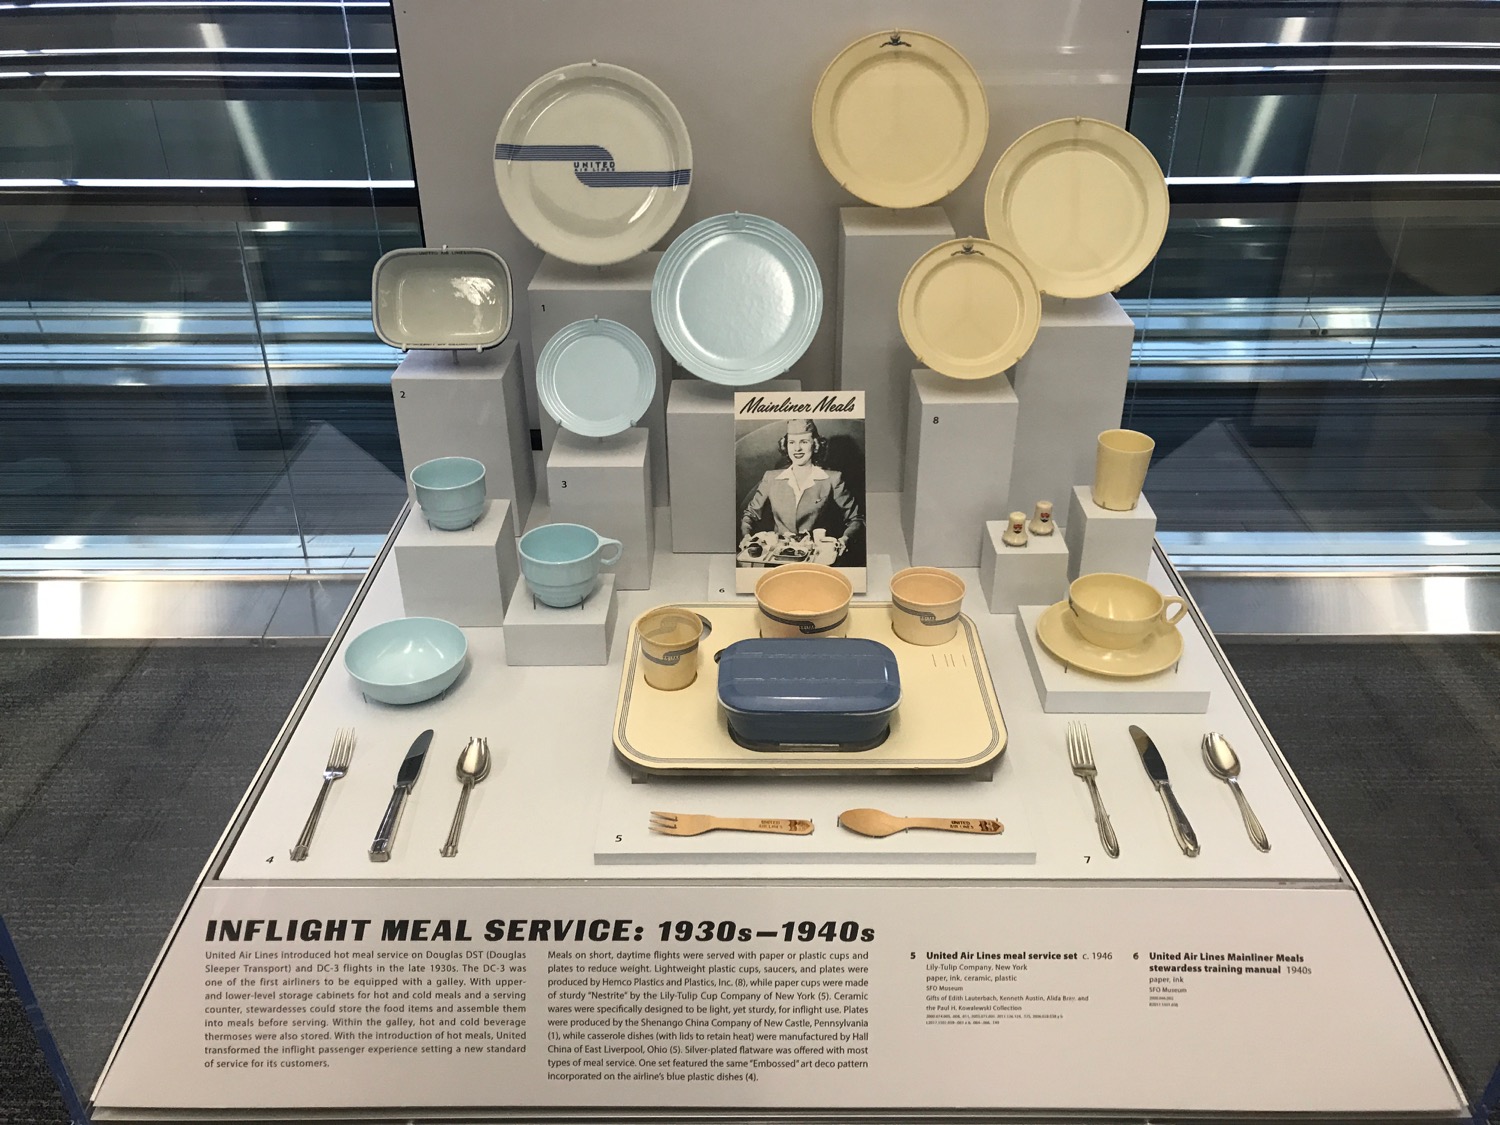 a display of dishes and utensils